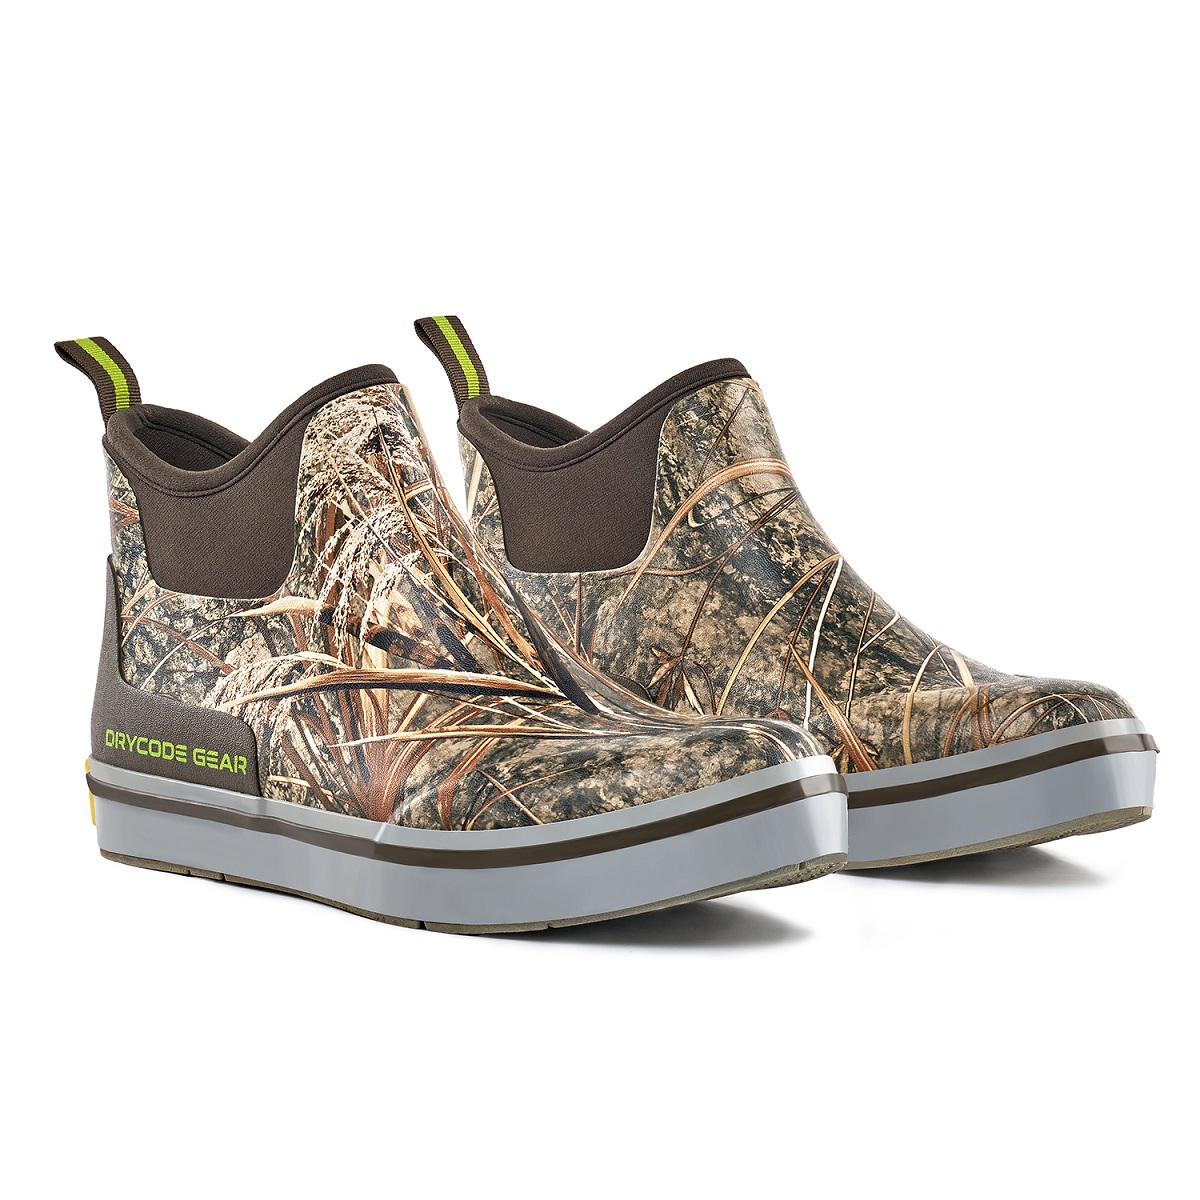 https://img-va.myshopline.com/image/store/1691119653301/DRYCODE-Deck-Fishing-Boots-Real-Reed-Camo-,-Anti-Slip-Rubber-Ankle-Boots-(2).jpeg?w=1200&h=1200